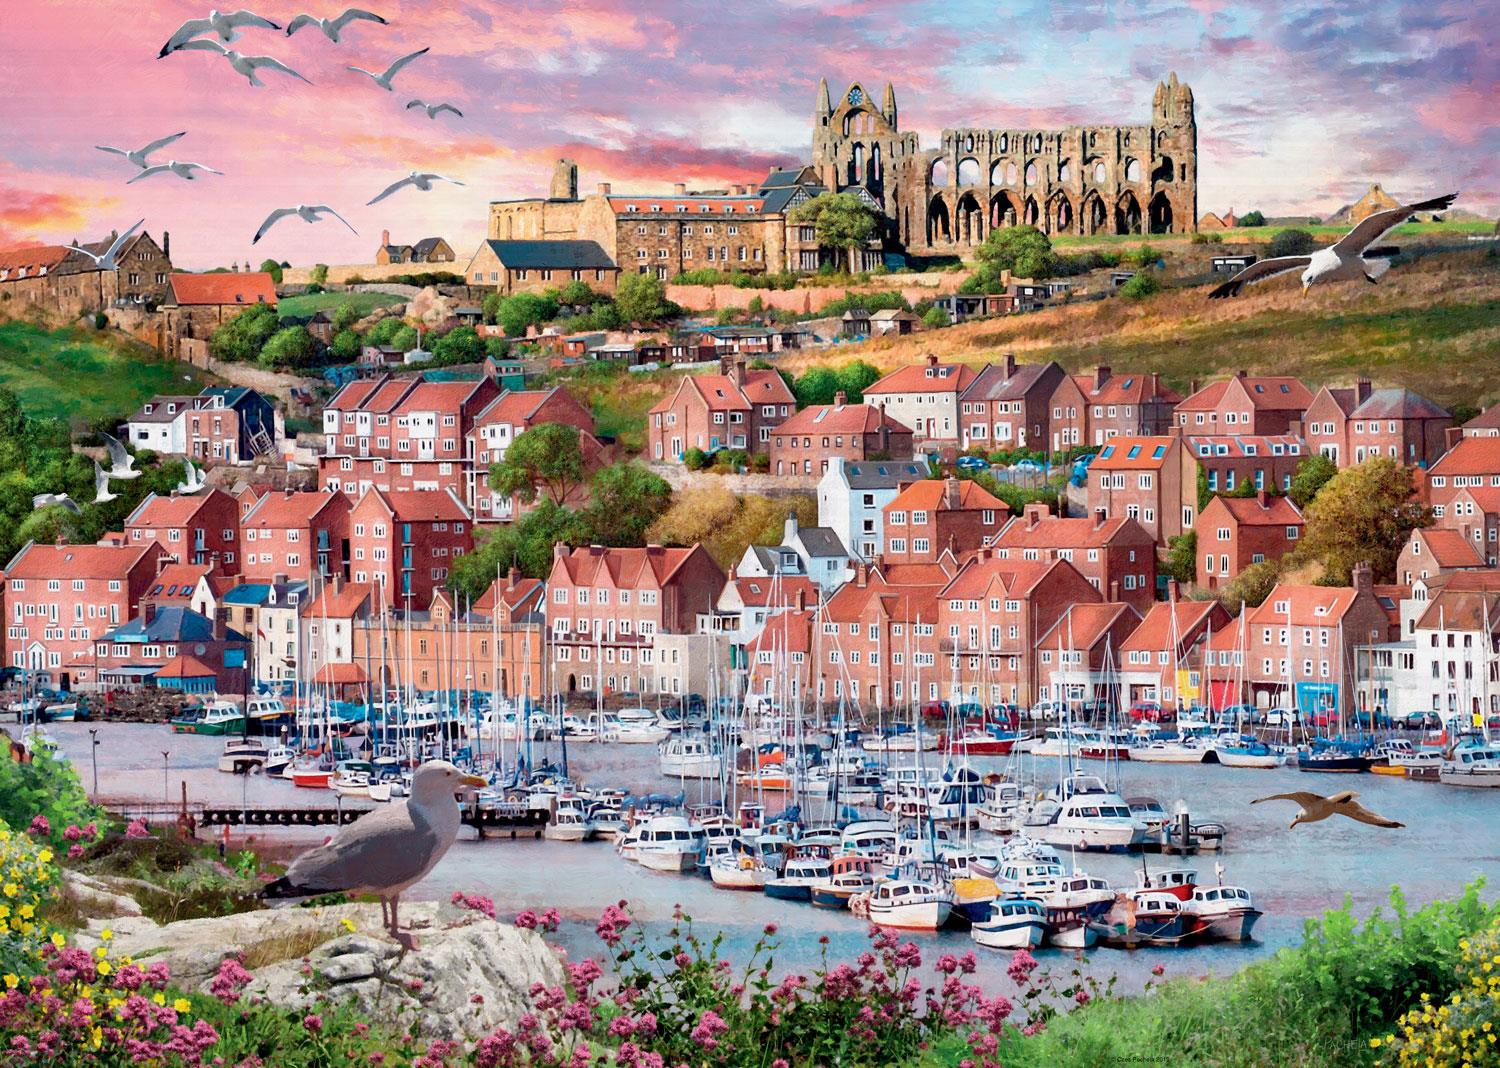 Ravensburger Whitby Sunset Jigsaw Puzzle (1000 Pieces)